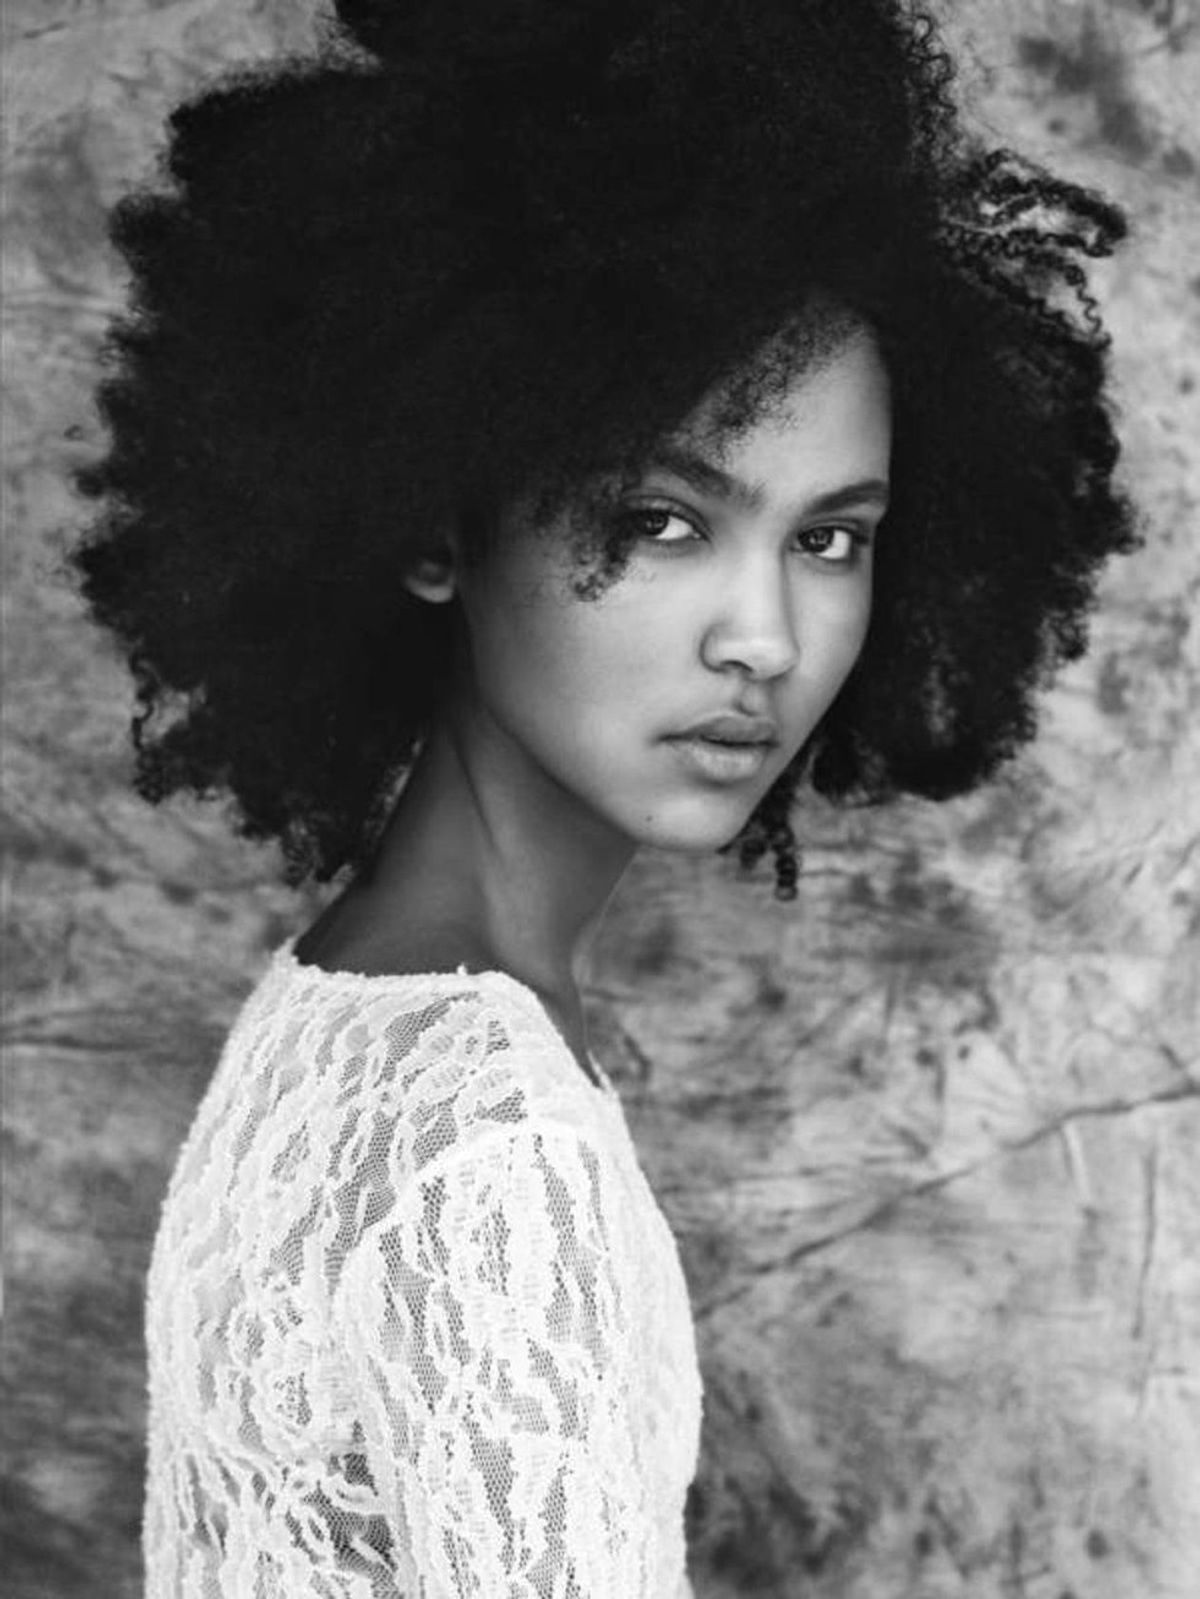 The Most Breathtaking Photos of Black Girls in Black and White